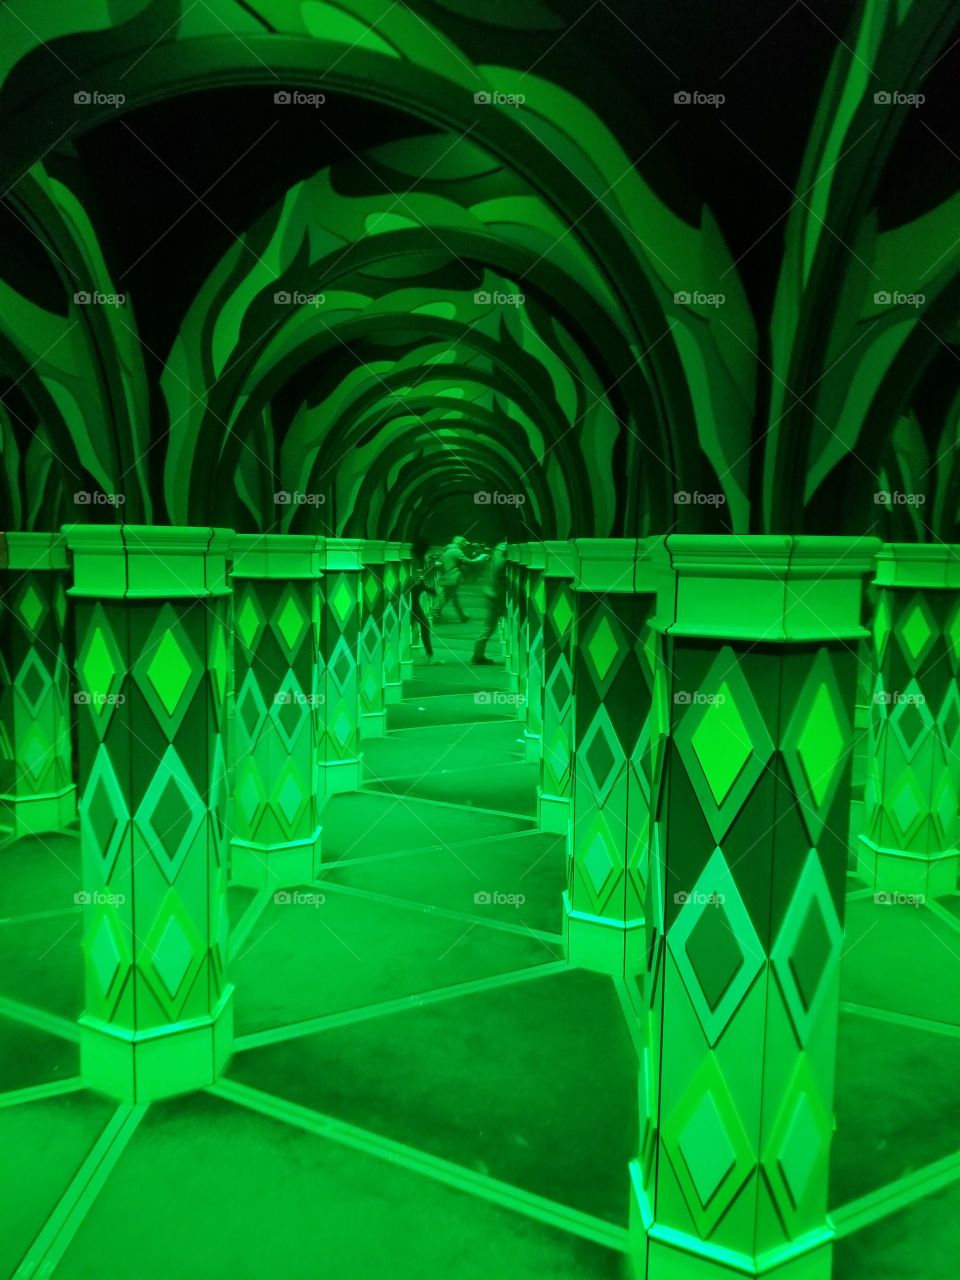 Electric green lights of crazy mirror maze confusion with random patterns throughout